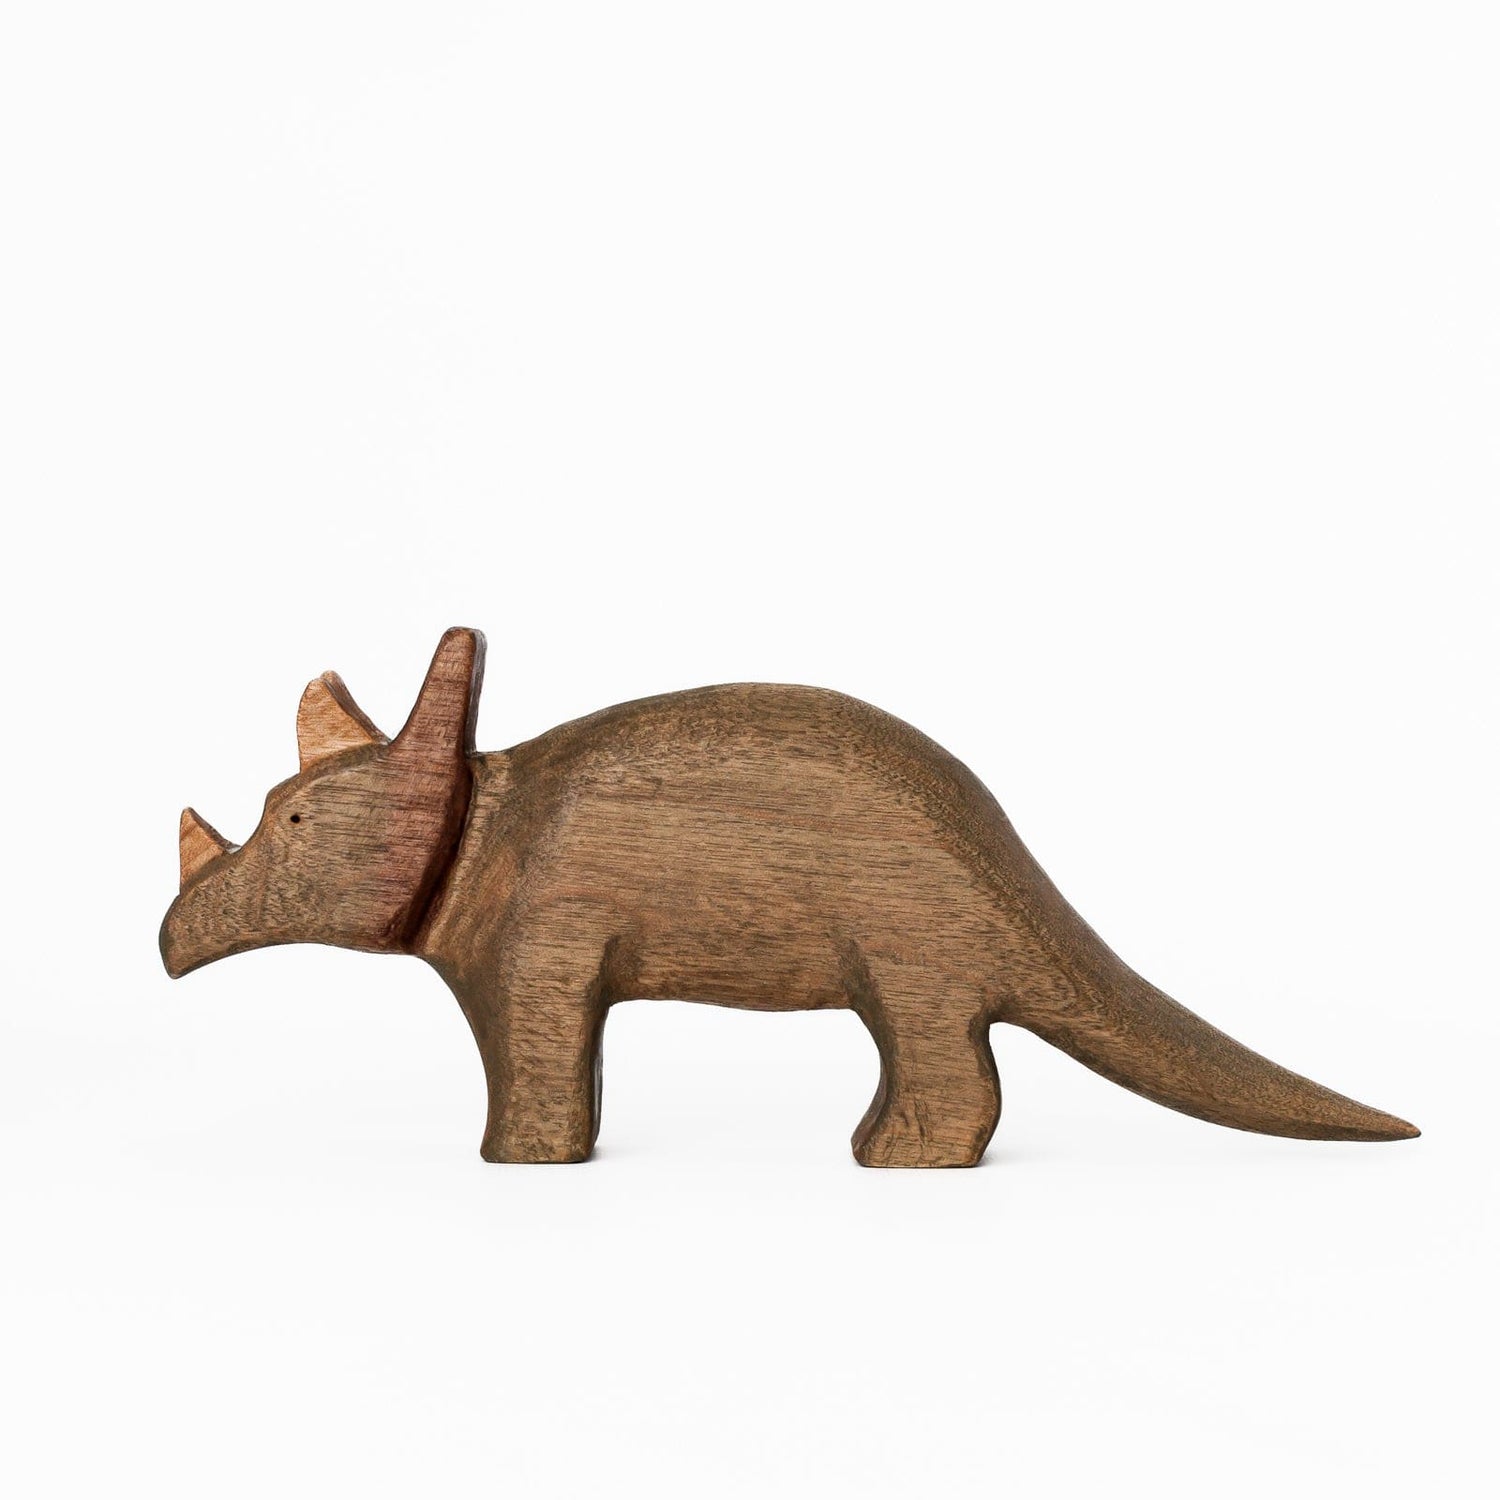 Bumbleberry Toys Wooden Animals "Tolkien Triceratops" Wooden Dinosaur Toy (Handmade in Canada)